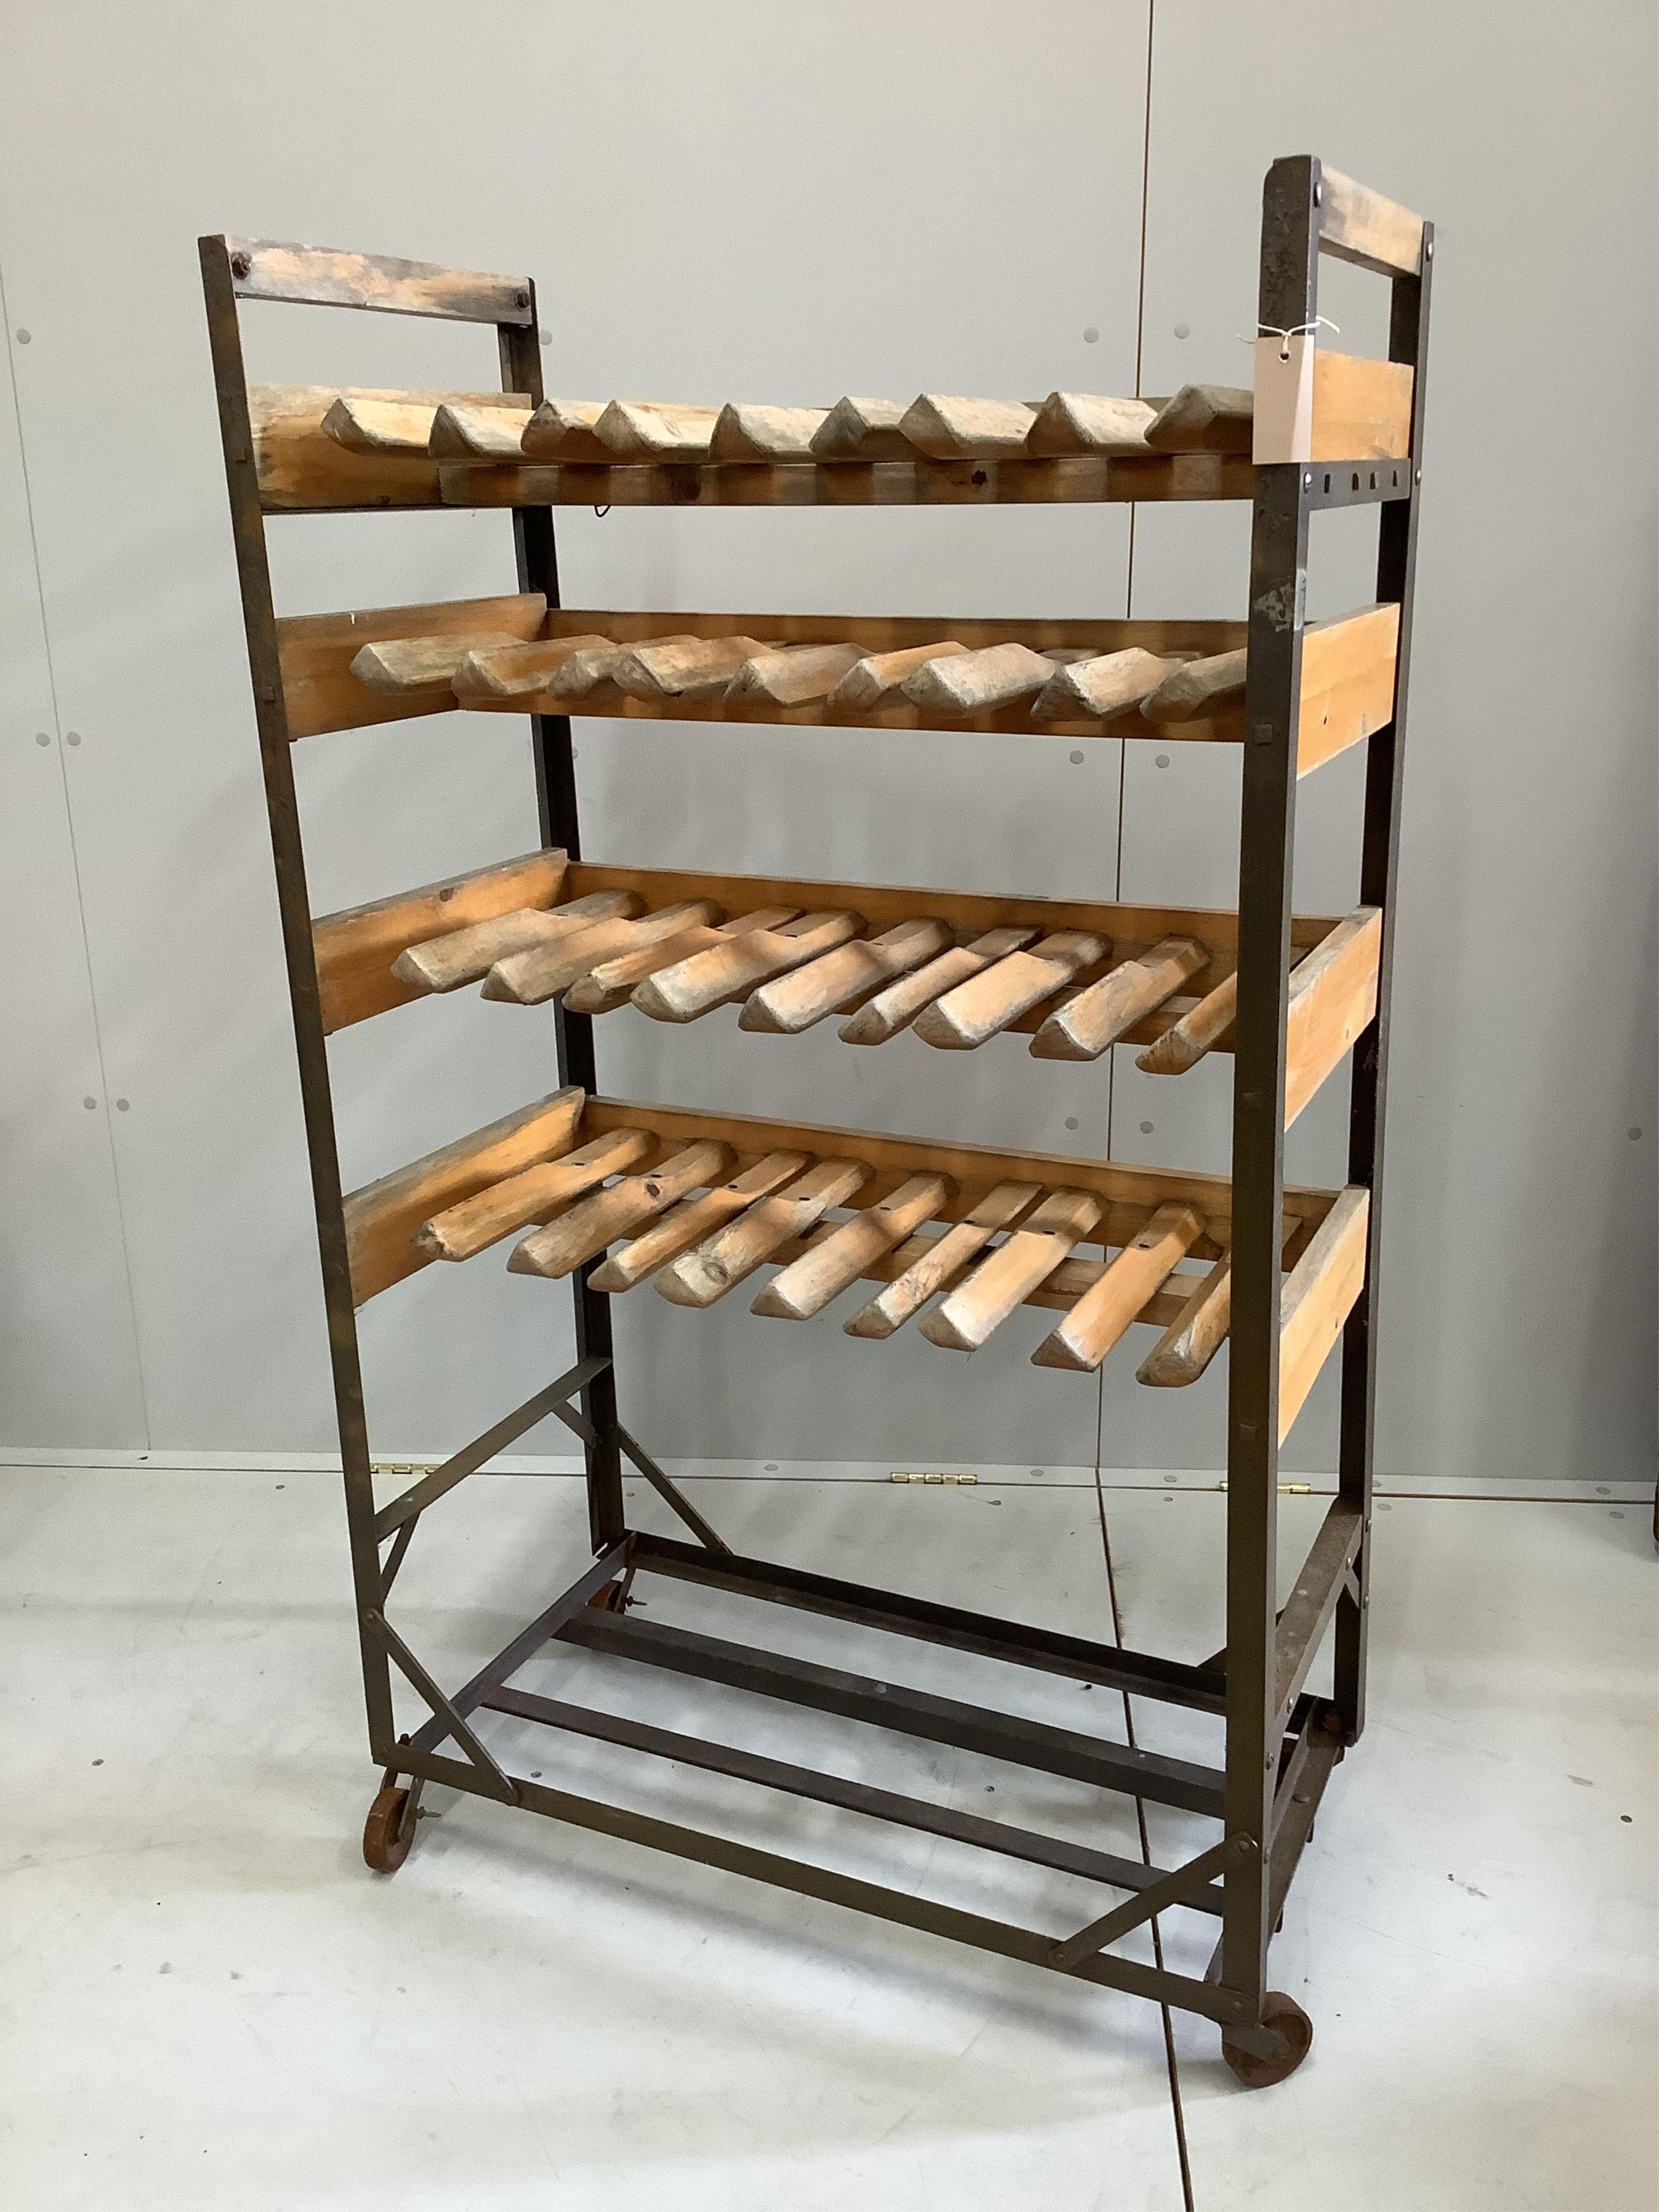 An early 20th century French slatted wrought iron baker's rack, width 81cm, depth 40cm, height 137cm. Condition - fair